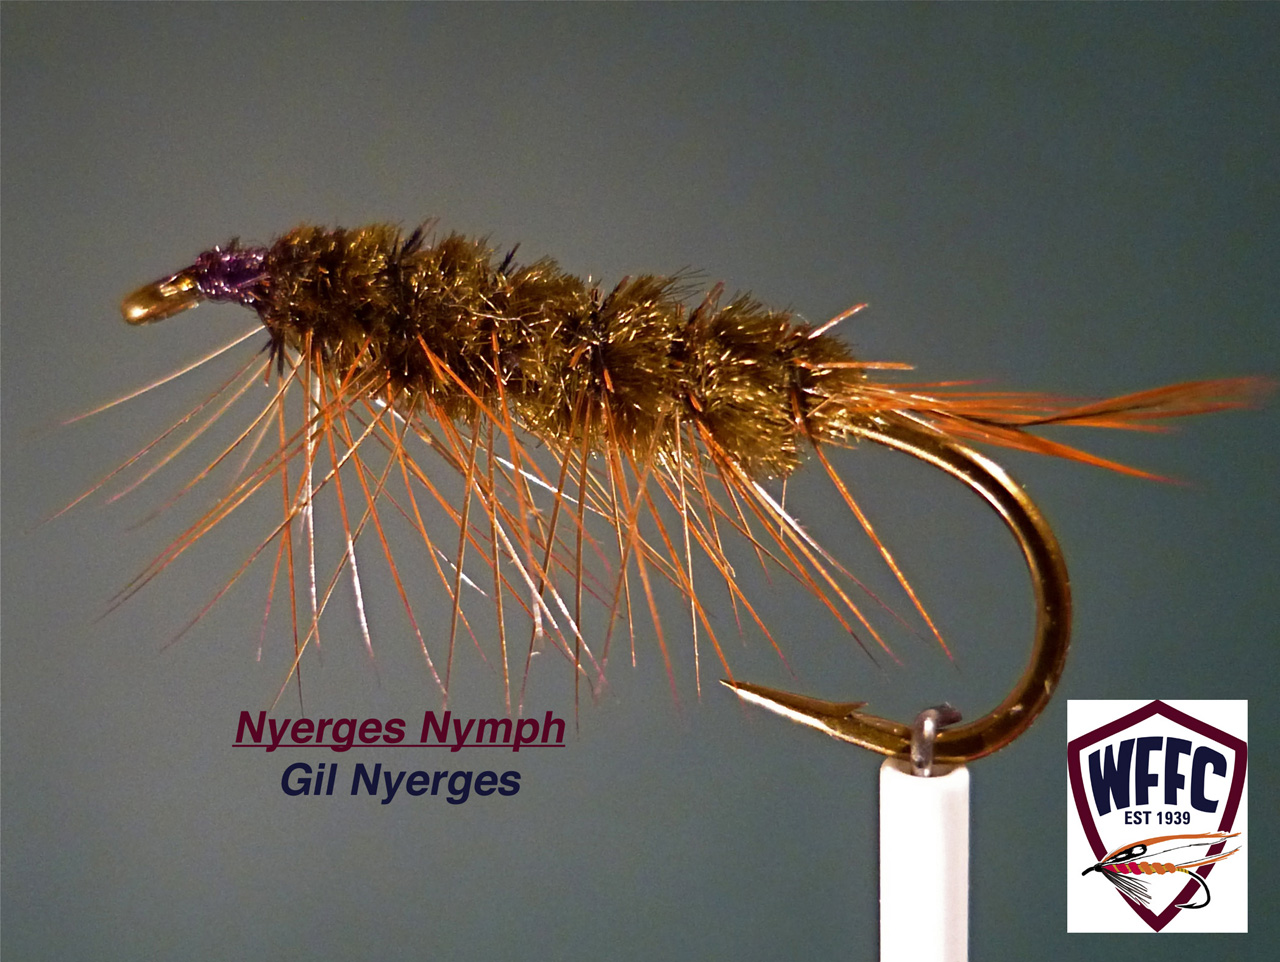 Nyerges Nymph